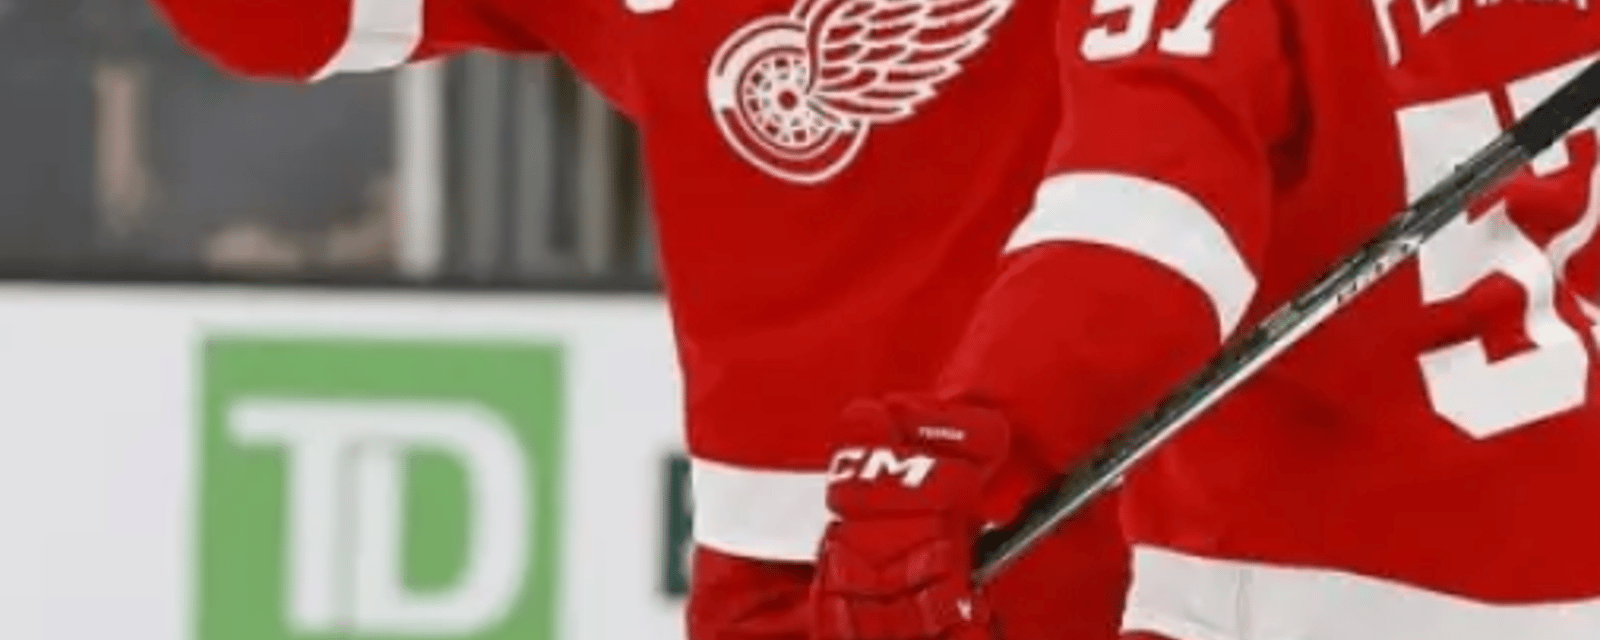 Roster move in Detroit gives Red Wings' fans hope